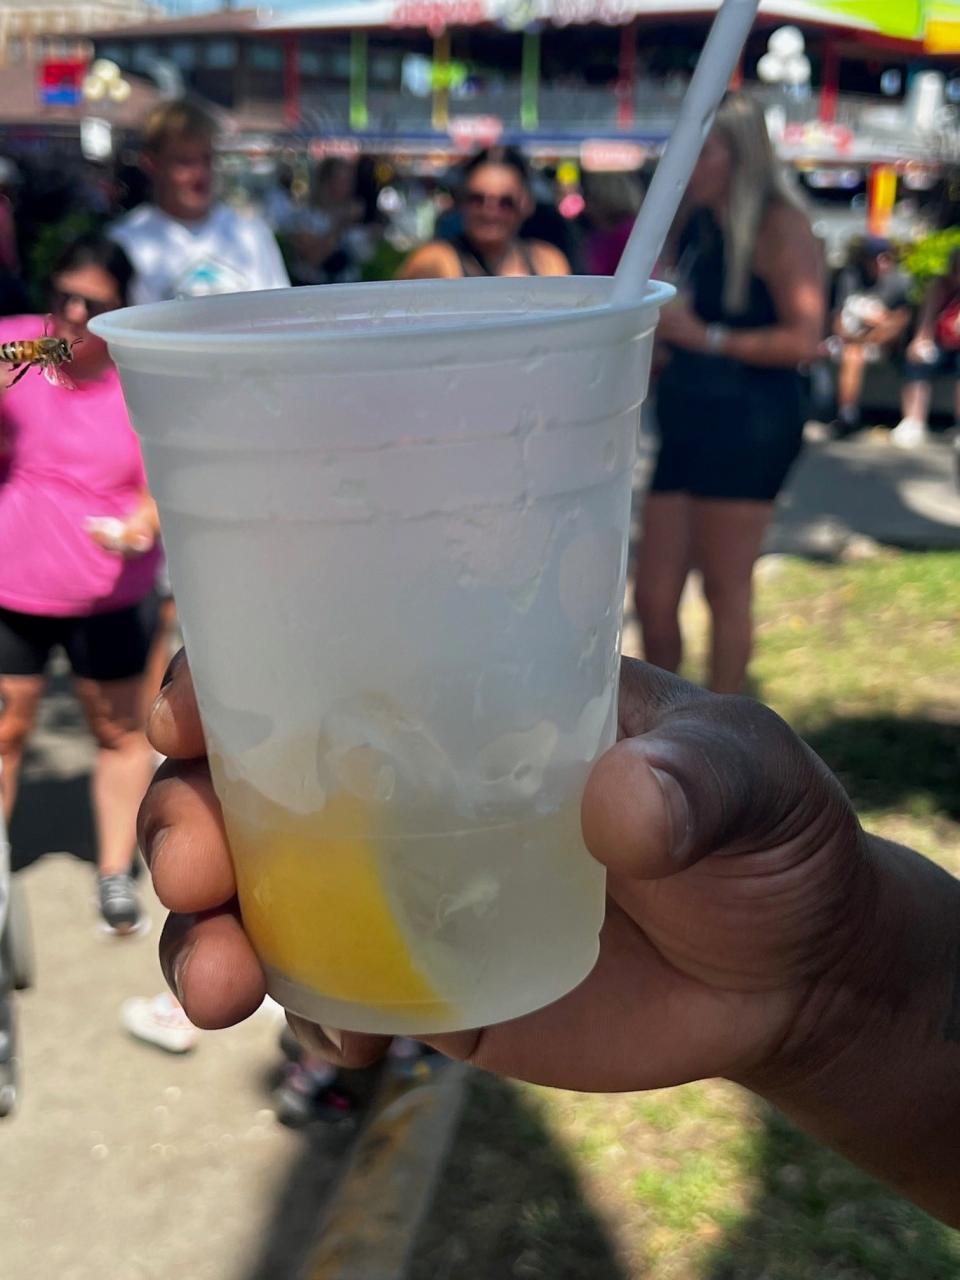 This lemonade went down fast at the Iowa State Fair.